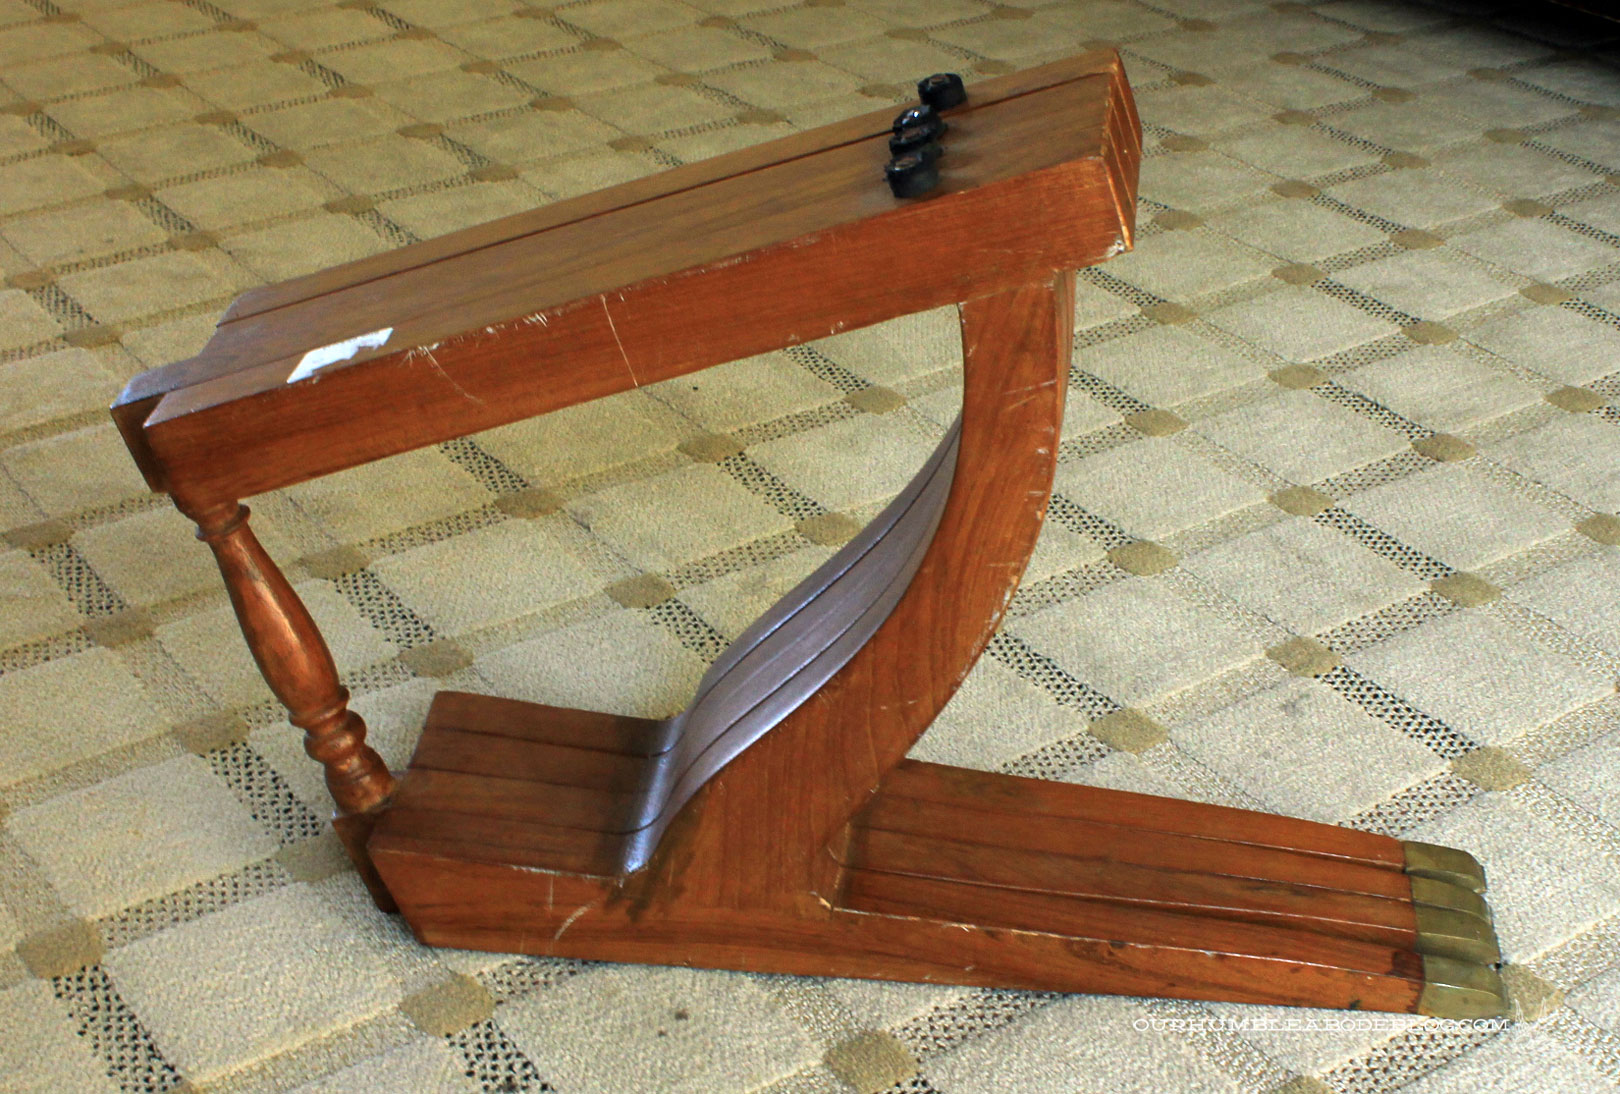 Wooden Folding Table Plans